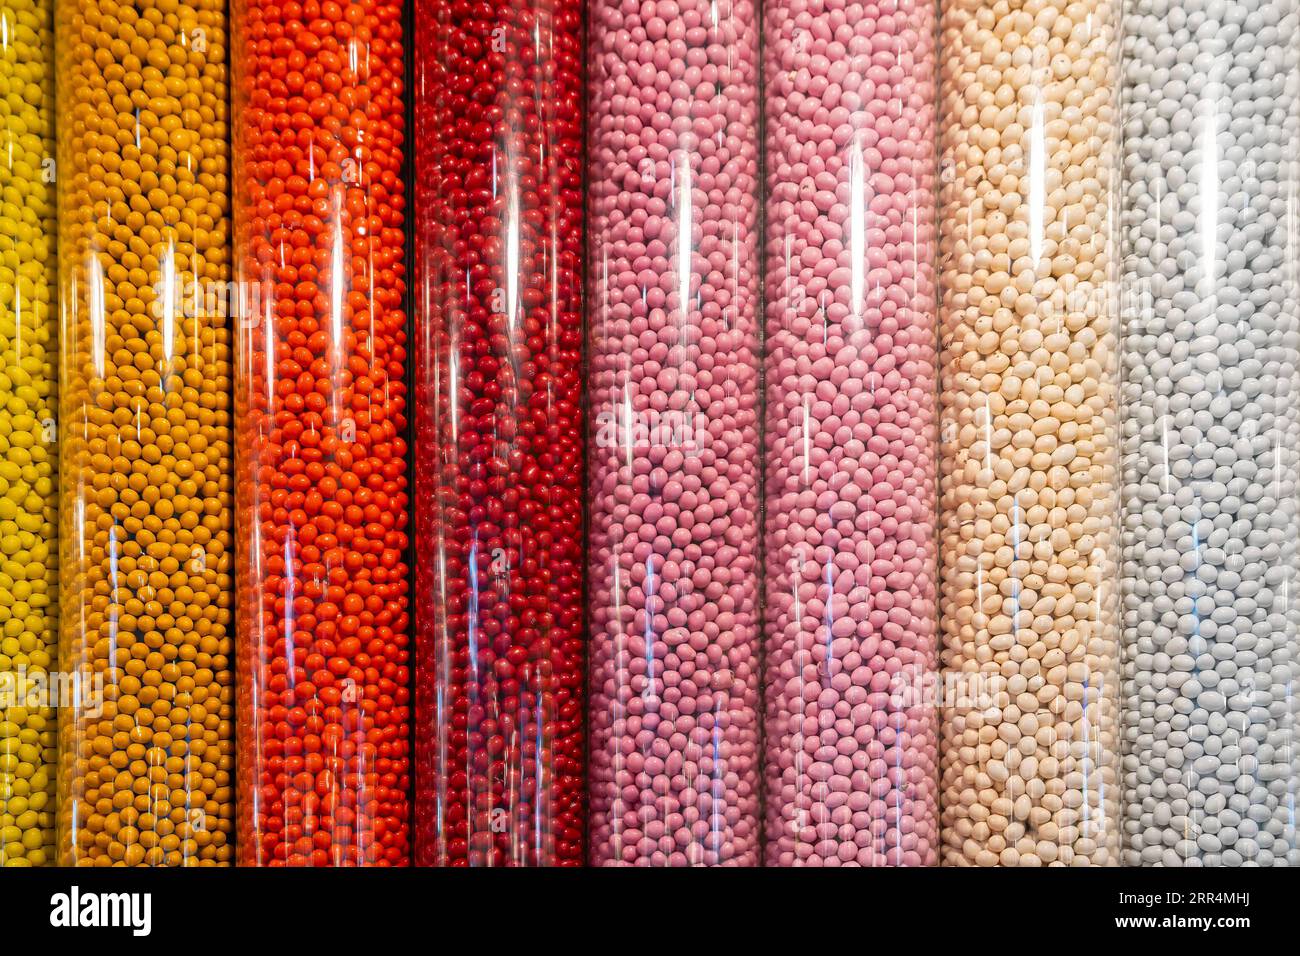 New York, USA - July 22nd, 2023: Dispensers full of various colors and tastes of candies in an M&M's store in New York. Stock Photo